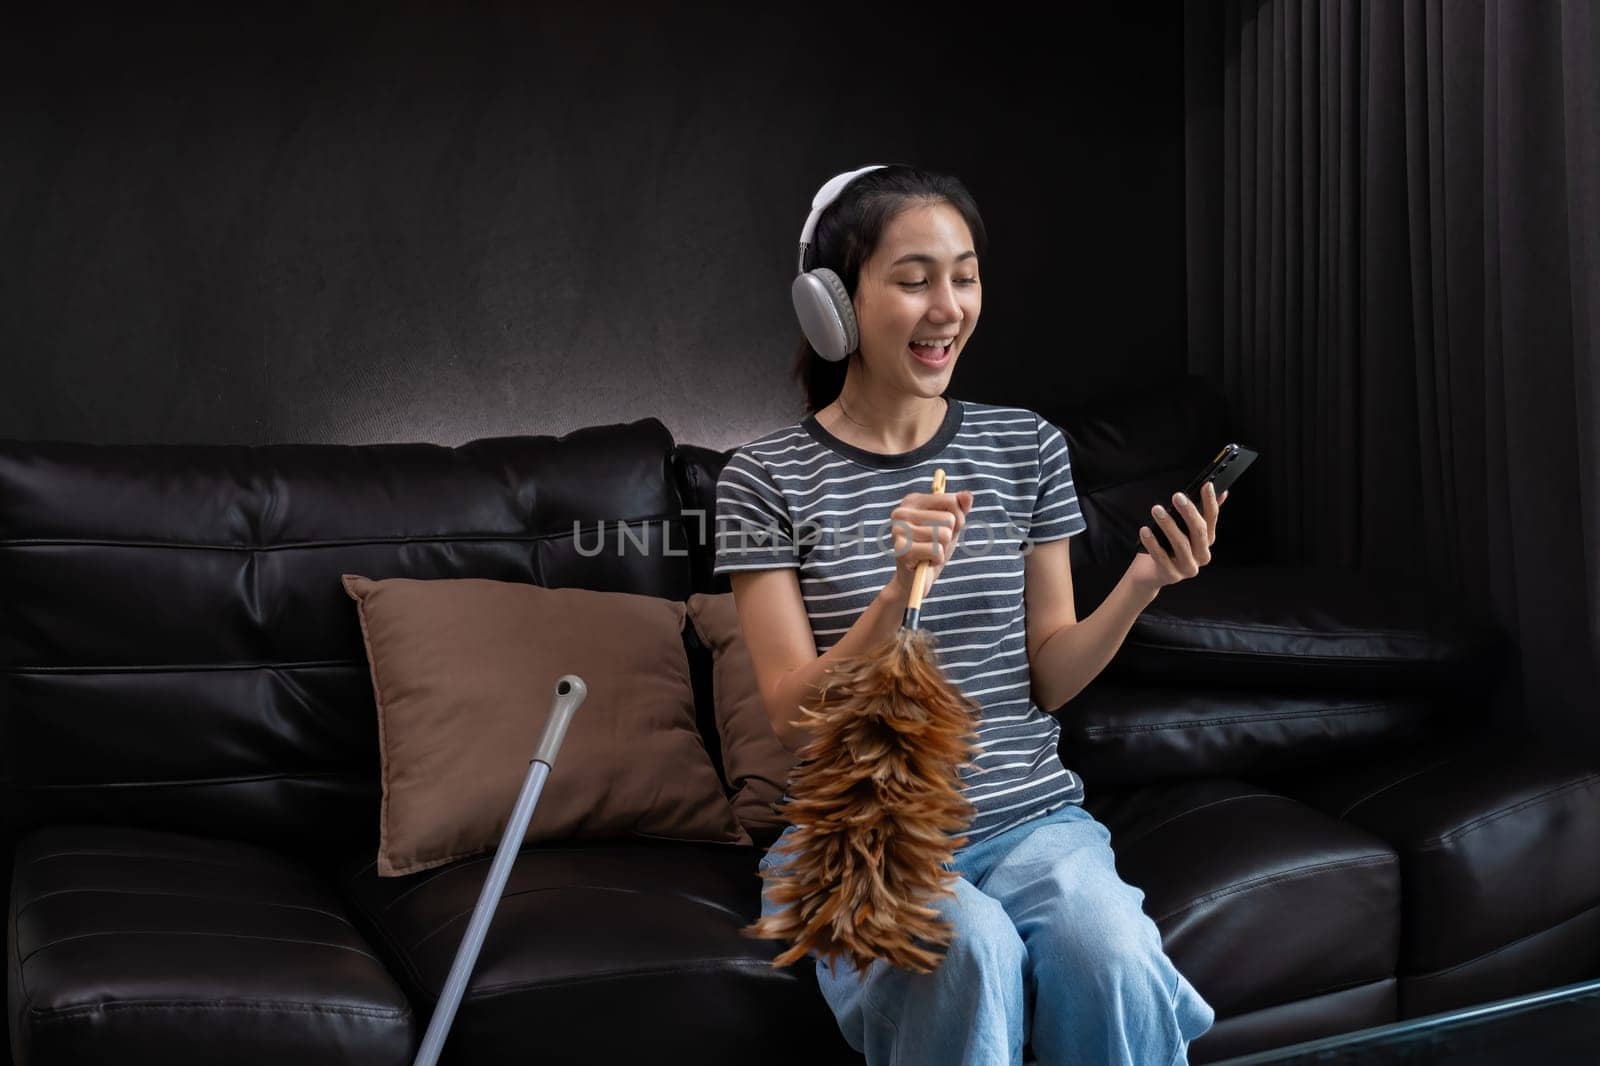 Smiling woman dusting with feather duster and listening to music on headphones. Concept of multitasking and joyful housework by wichayada